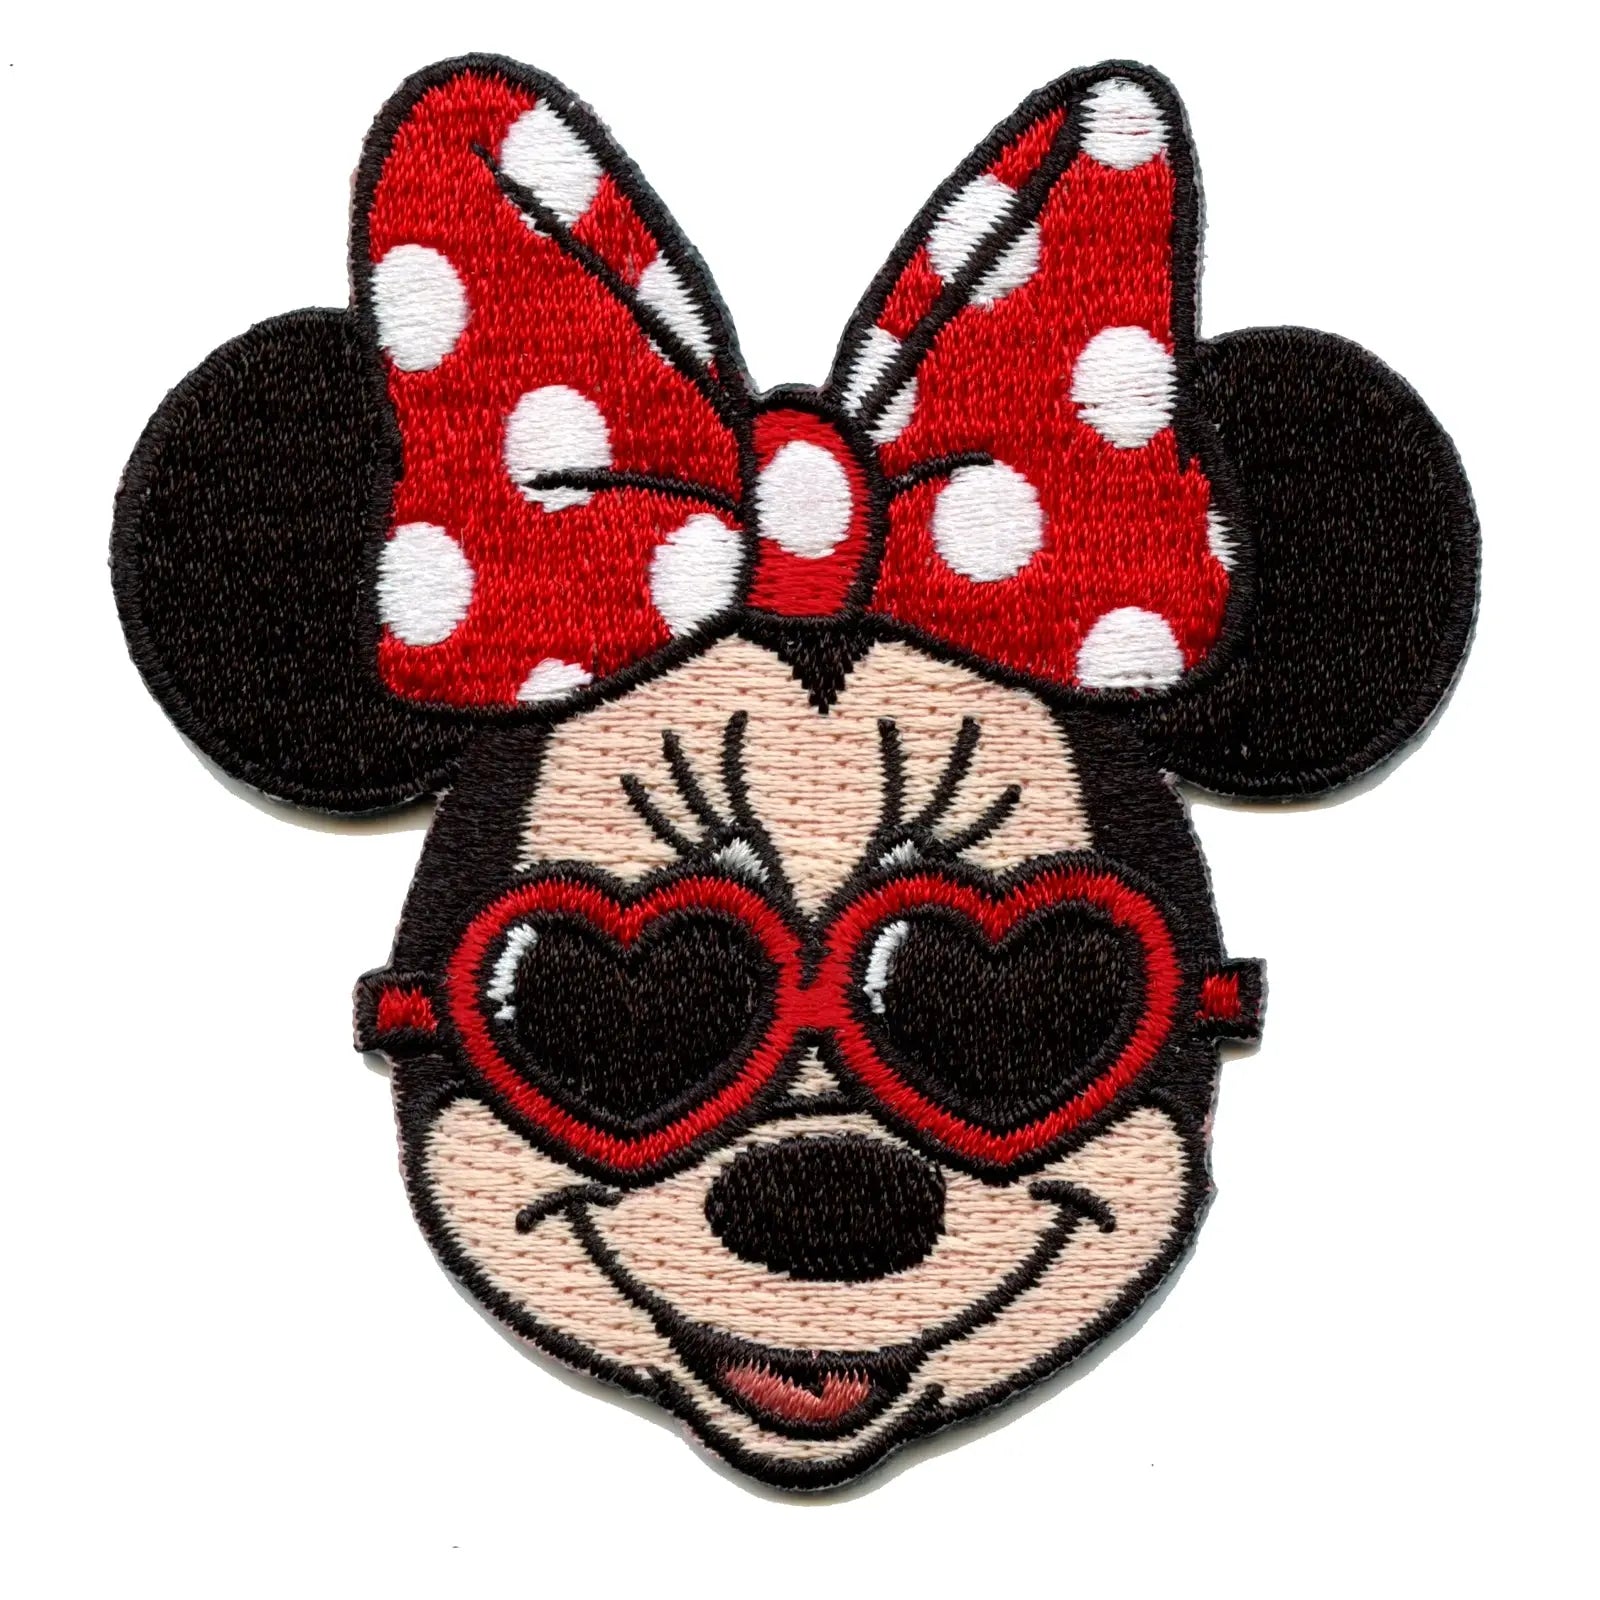 Minnie Mouse Cartoon Red & White Bow Embroidered Iron on Patch